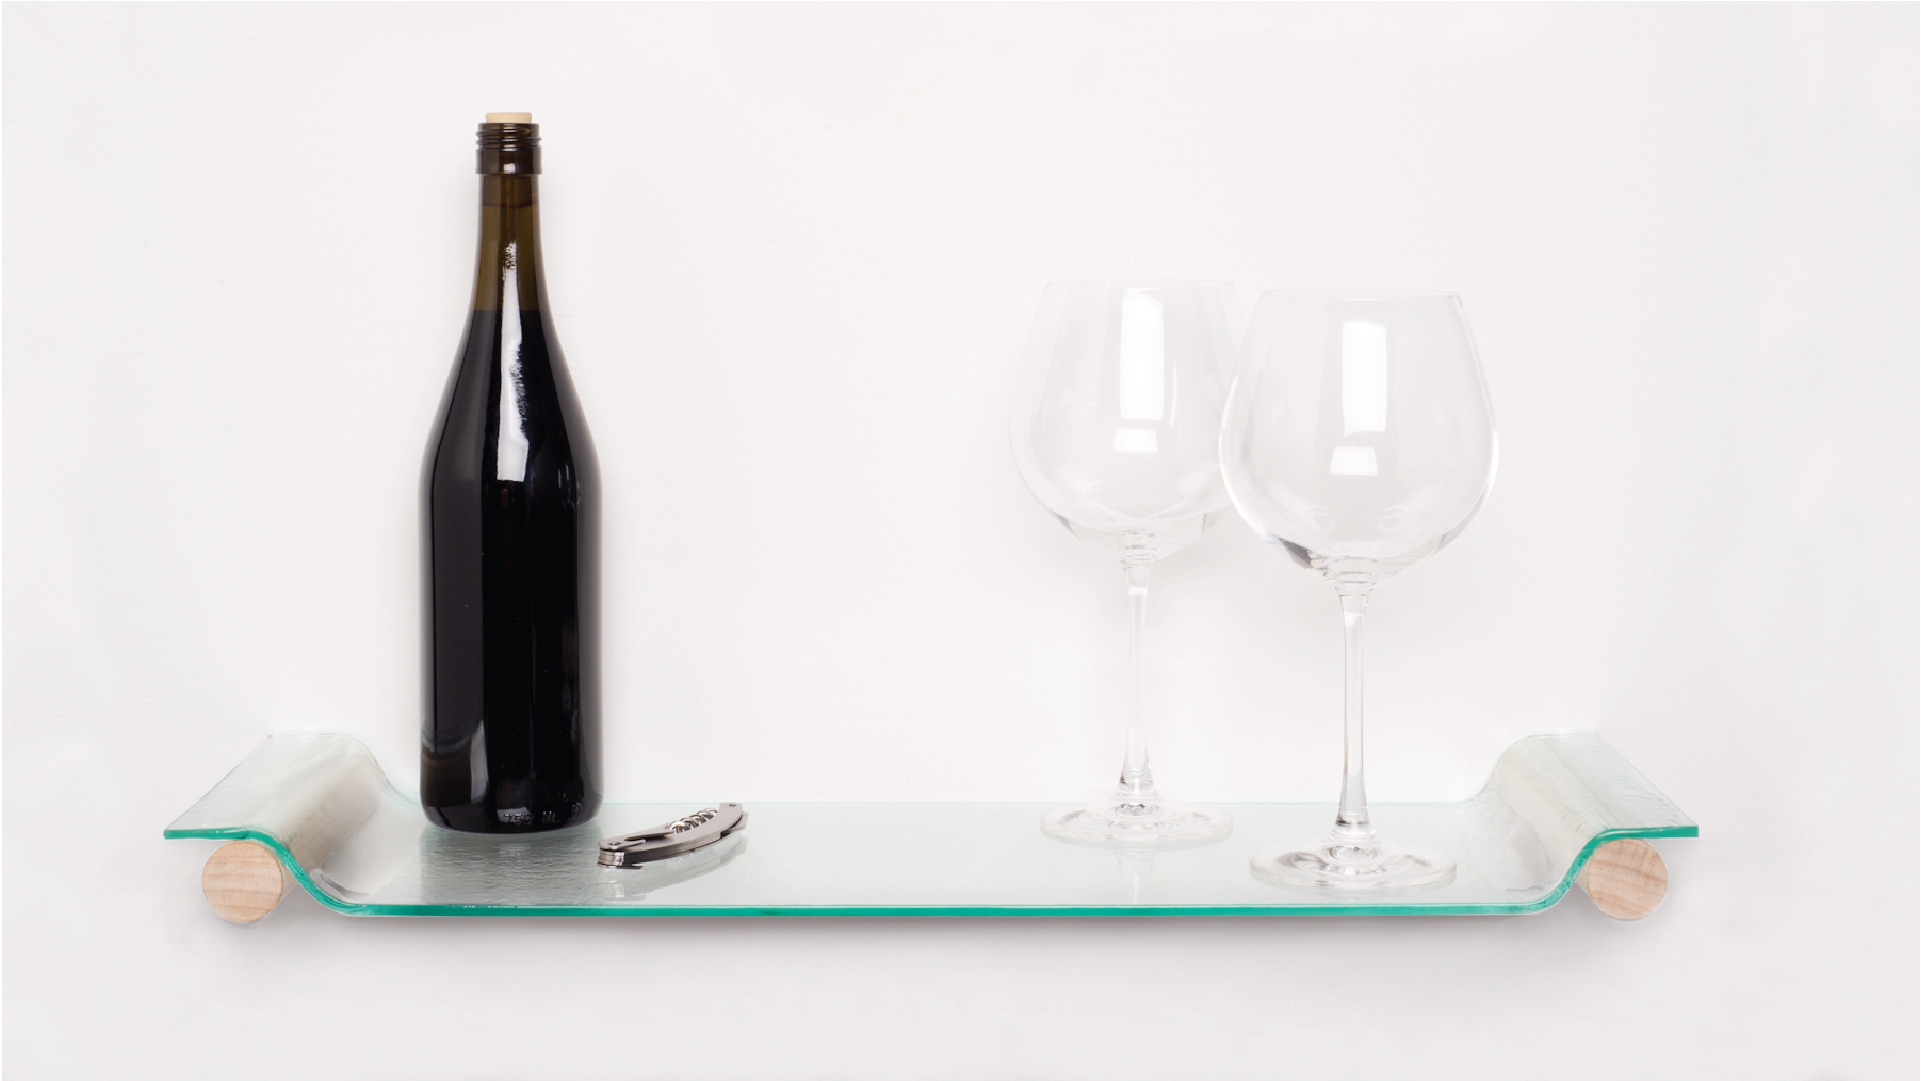 Glass tray placed on the wall. Bottle of wine, 2 cups of wines and a bottle opener placed on the top of the tray.